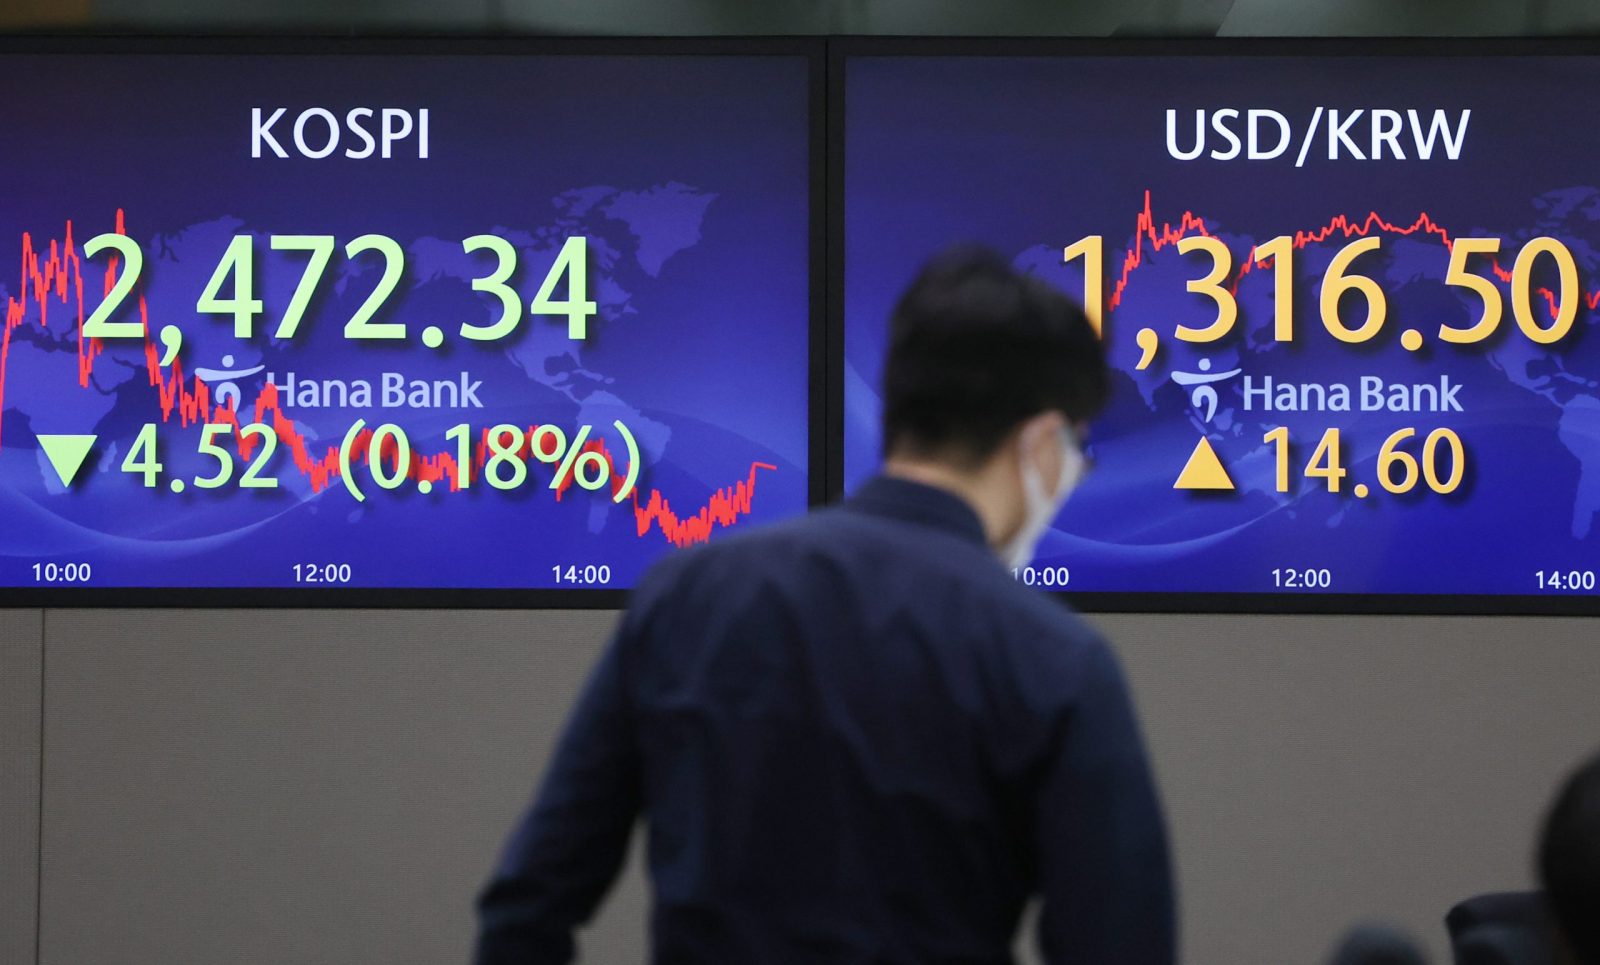 epa10556501 An electronic signboard in the dealing room of Hana Bank in Seoul, South Korea, 03 April 2023, shows the benchmark Korea Composite Stock Price Index having dropped 4.52 points, or 0.18 percent, to close at 2,472.34. South Korean shares ended lower amid renewed concerns over inflation that followed the unexpected announcement by OPEC and its allies to implement further oil output cuts.  EPA/YONHAP SOUTH KOREA OUT